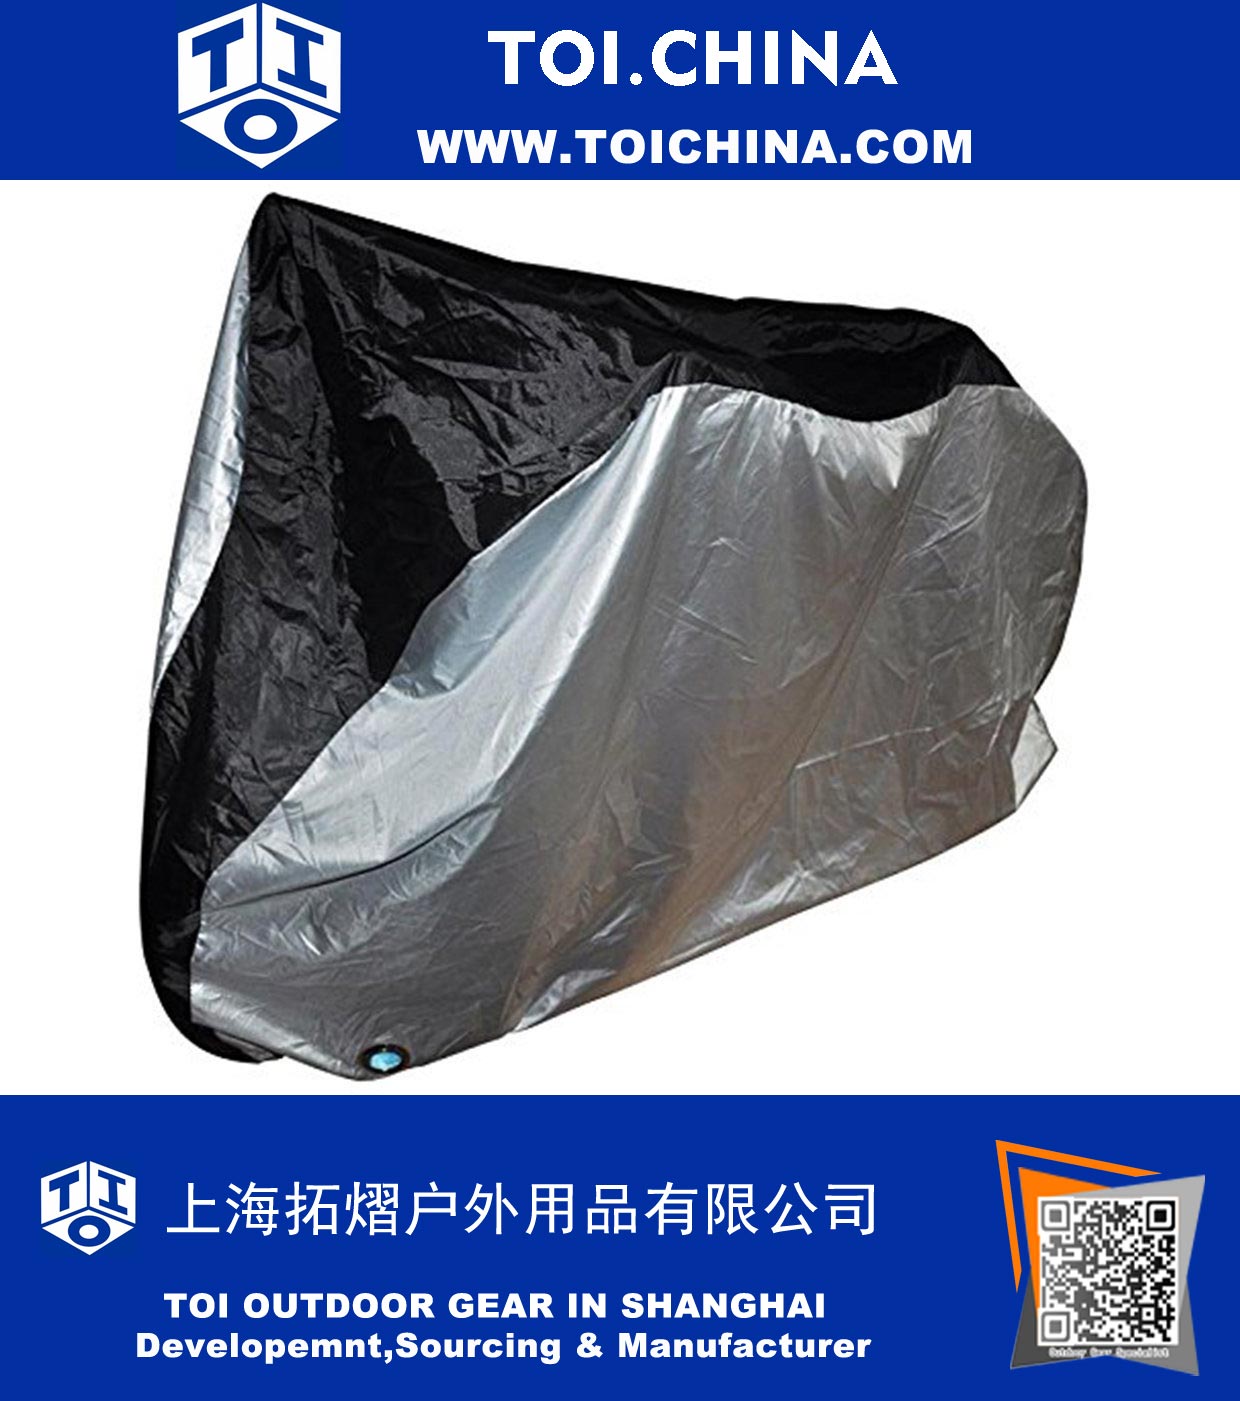 Outdoor Bike Cover,190T Polyester Waterproof Rain Dust Sun Proof Bicycle Cover with Lock Hole, Road Bike, Mountain Bike